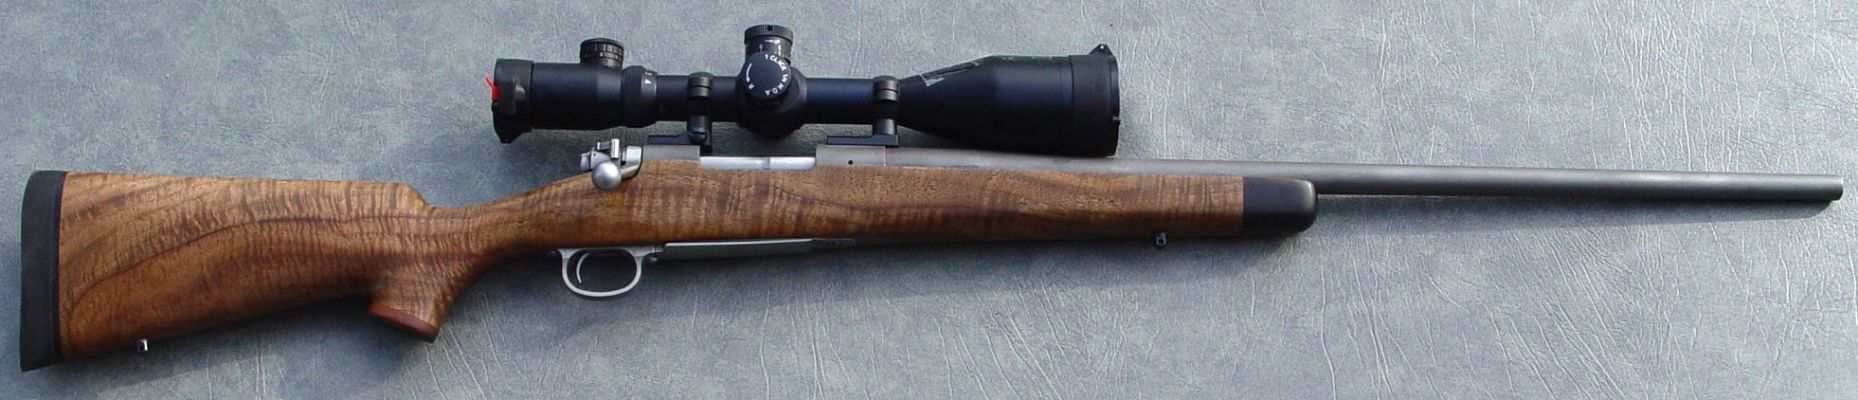 Custom 300 WSM
This is one of two Montana Rifle 300 WSMs I built last year. Barrel is 1-10 twist, SS, match, Lothar Walther. Stock is Exhibition grade Bastogne Walnut with Madagascar Ebony tip and cap. Scope is a 4x16x56 MPZ Tactical by Hakko. Shoots .20 inch groups.
